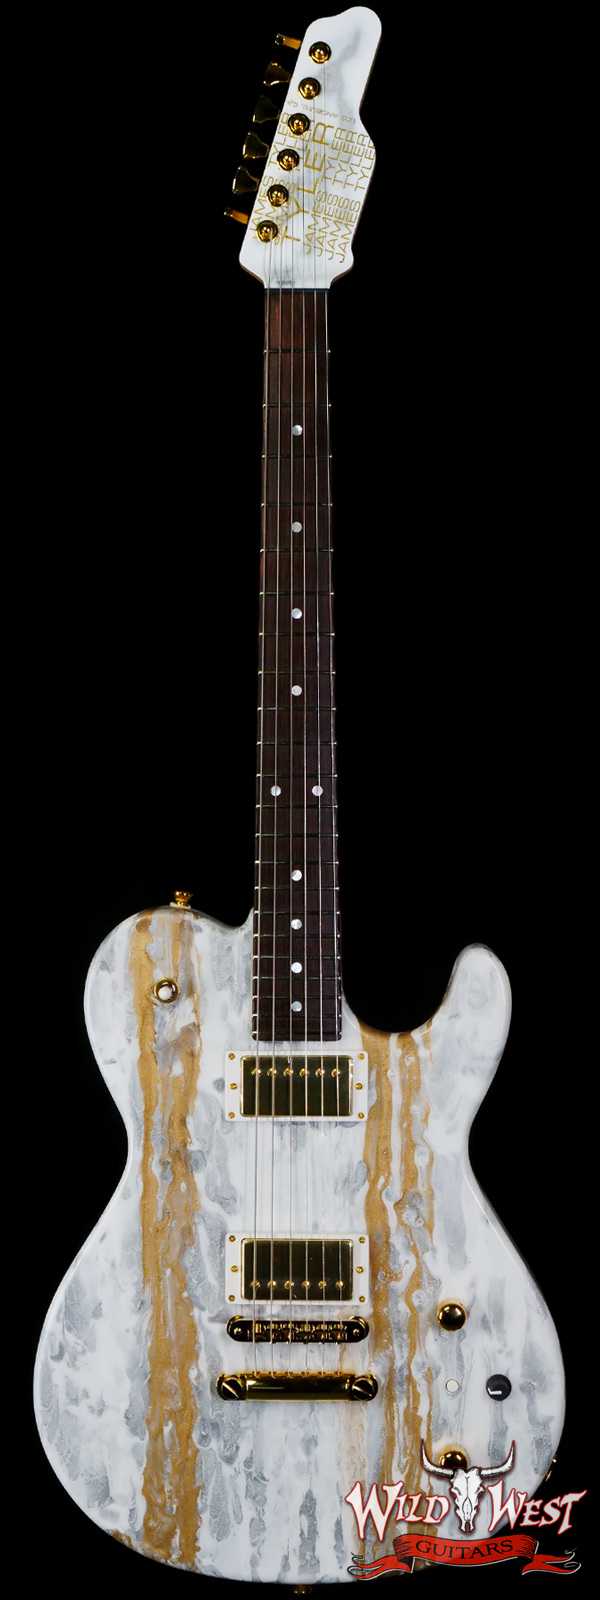 James Tyler USA Mongoose Special Mahogany Body with Maple Top Semi-Hollow Body White Shmear